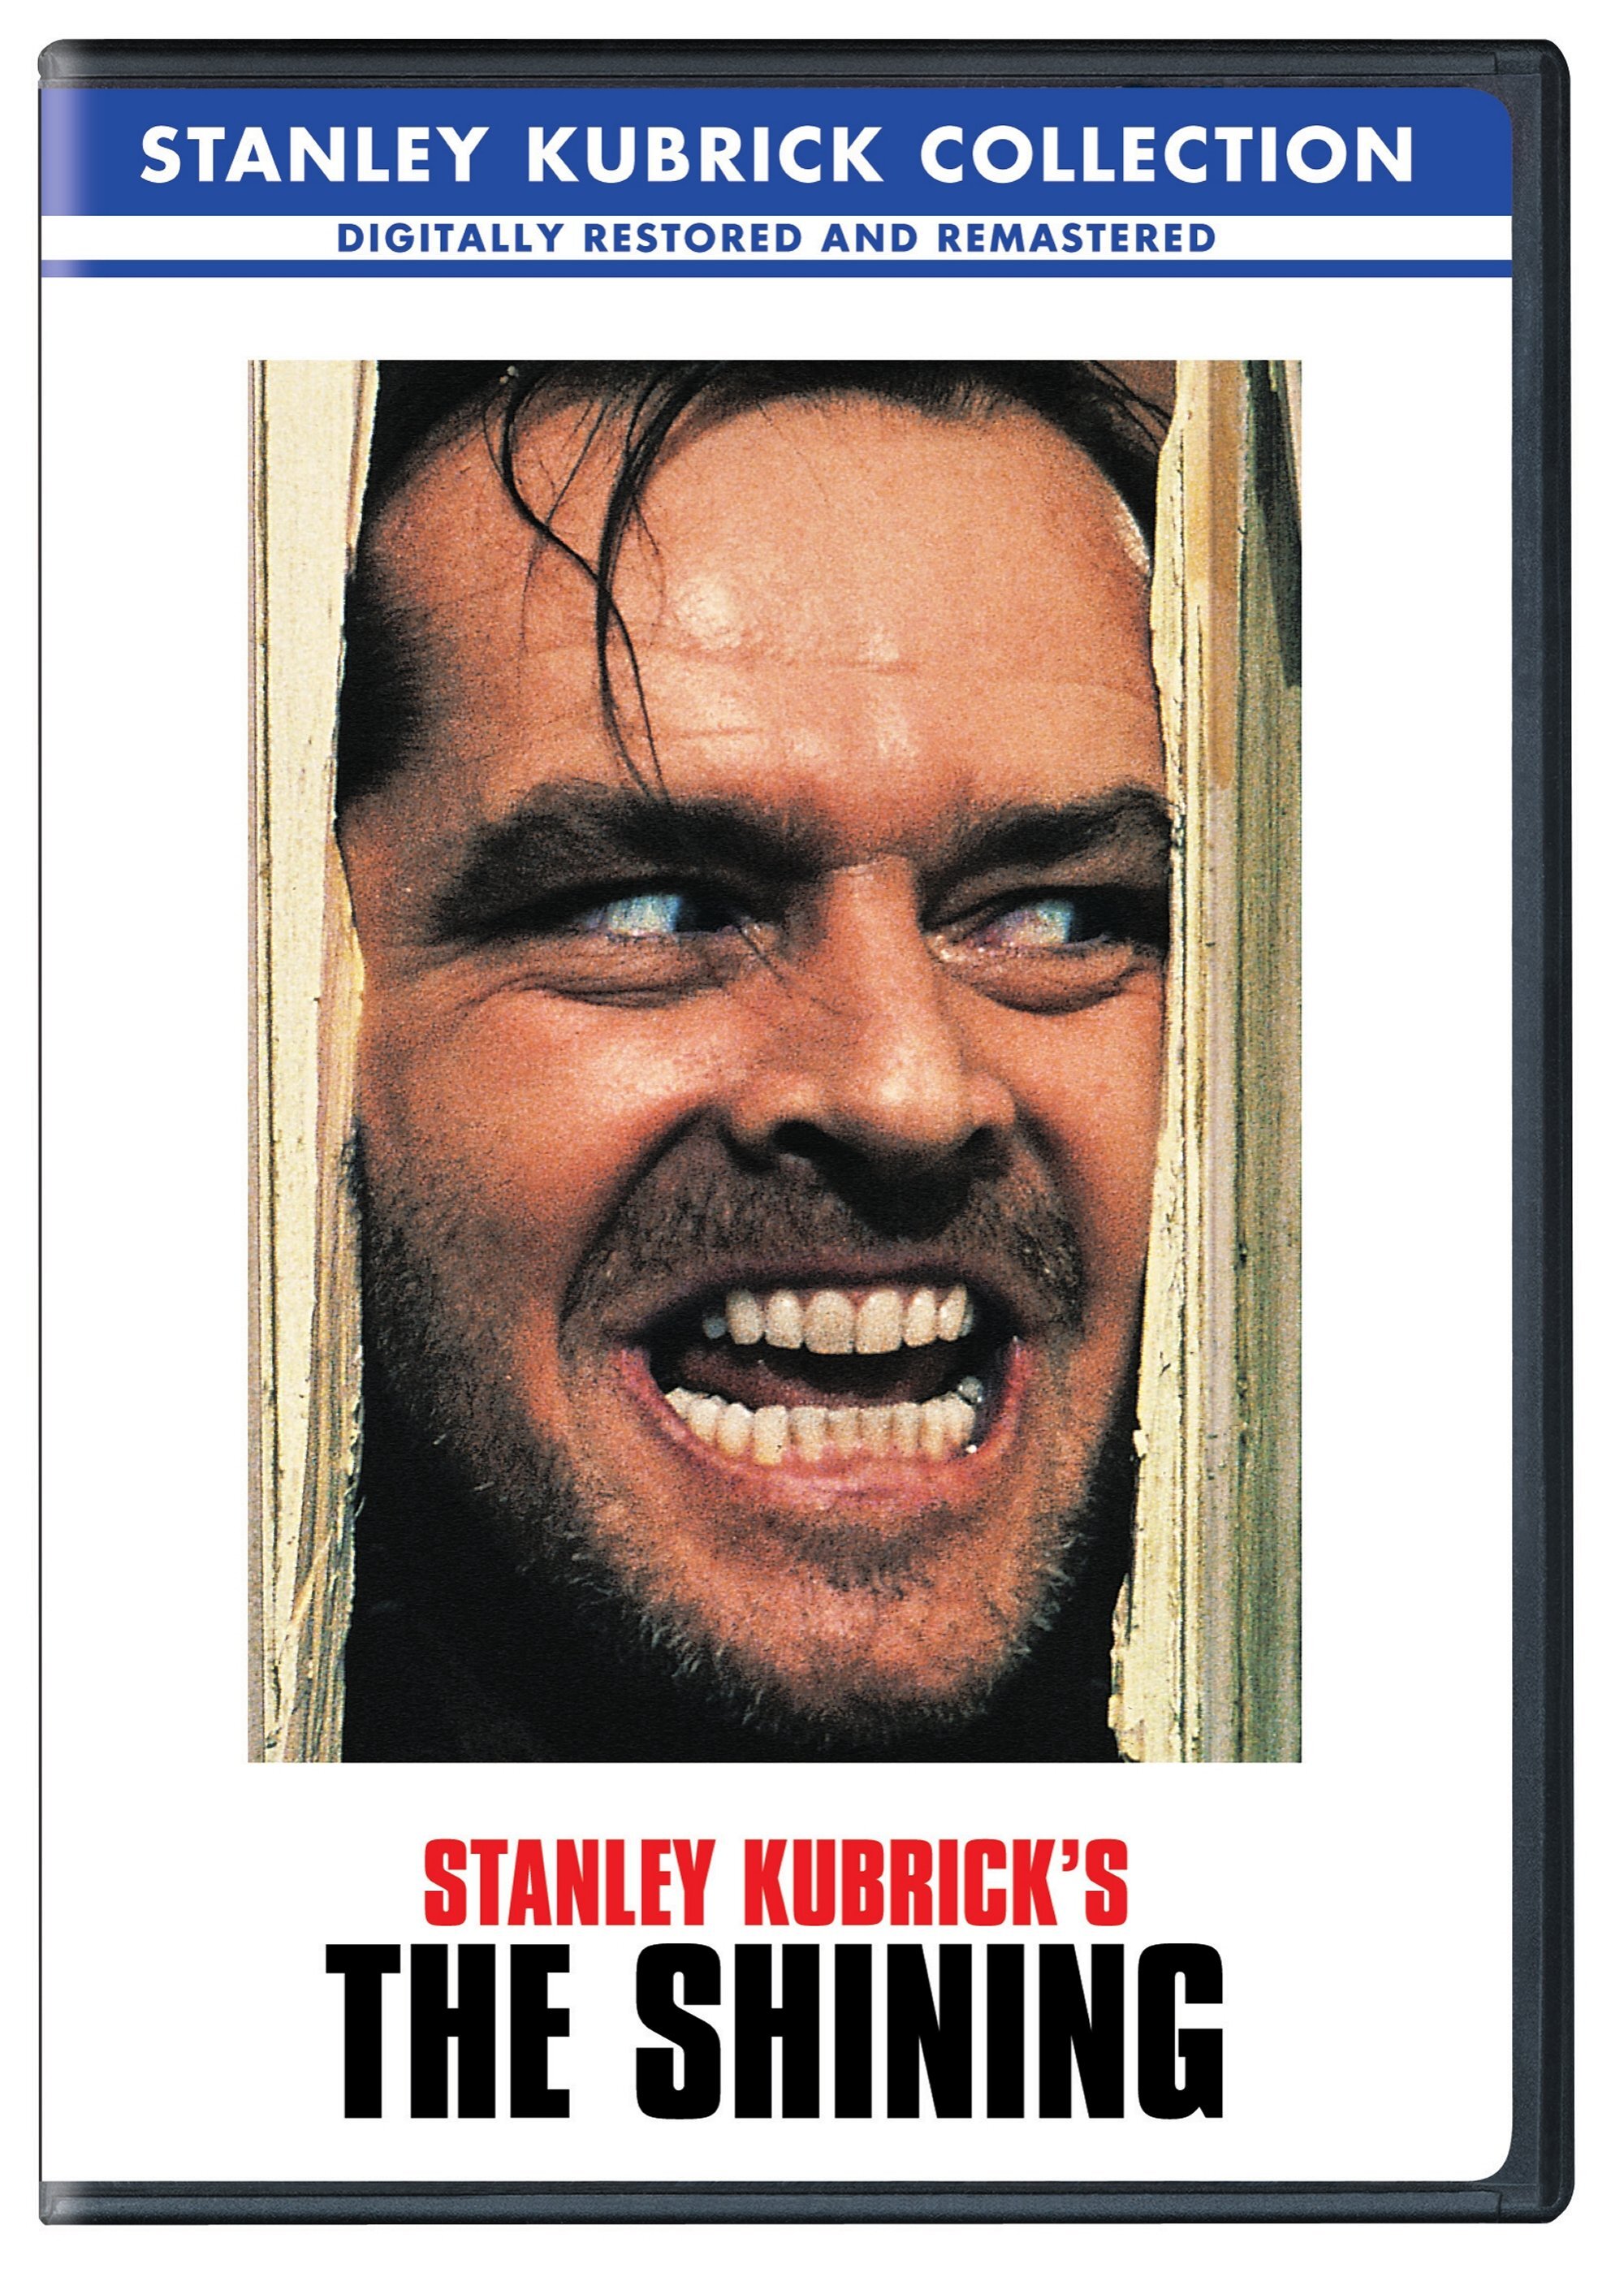 The Shining (DVD Widescreen) - DVD [ 1980 ]  - Horror Movies On DVD - Movies On GRUV